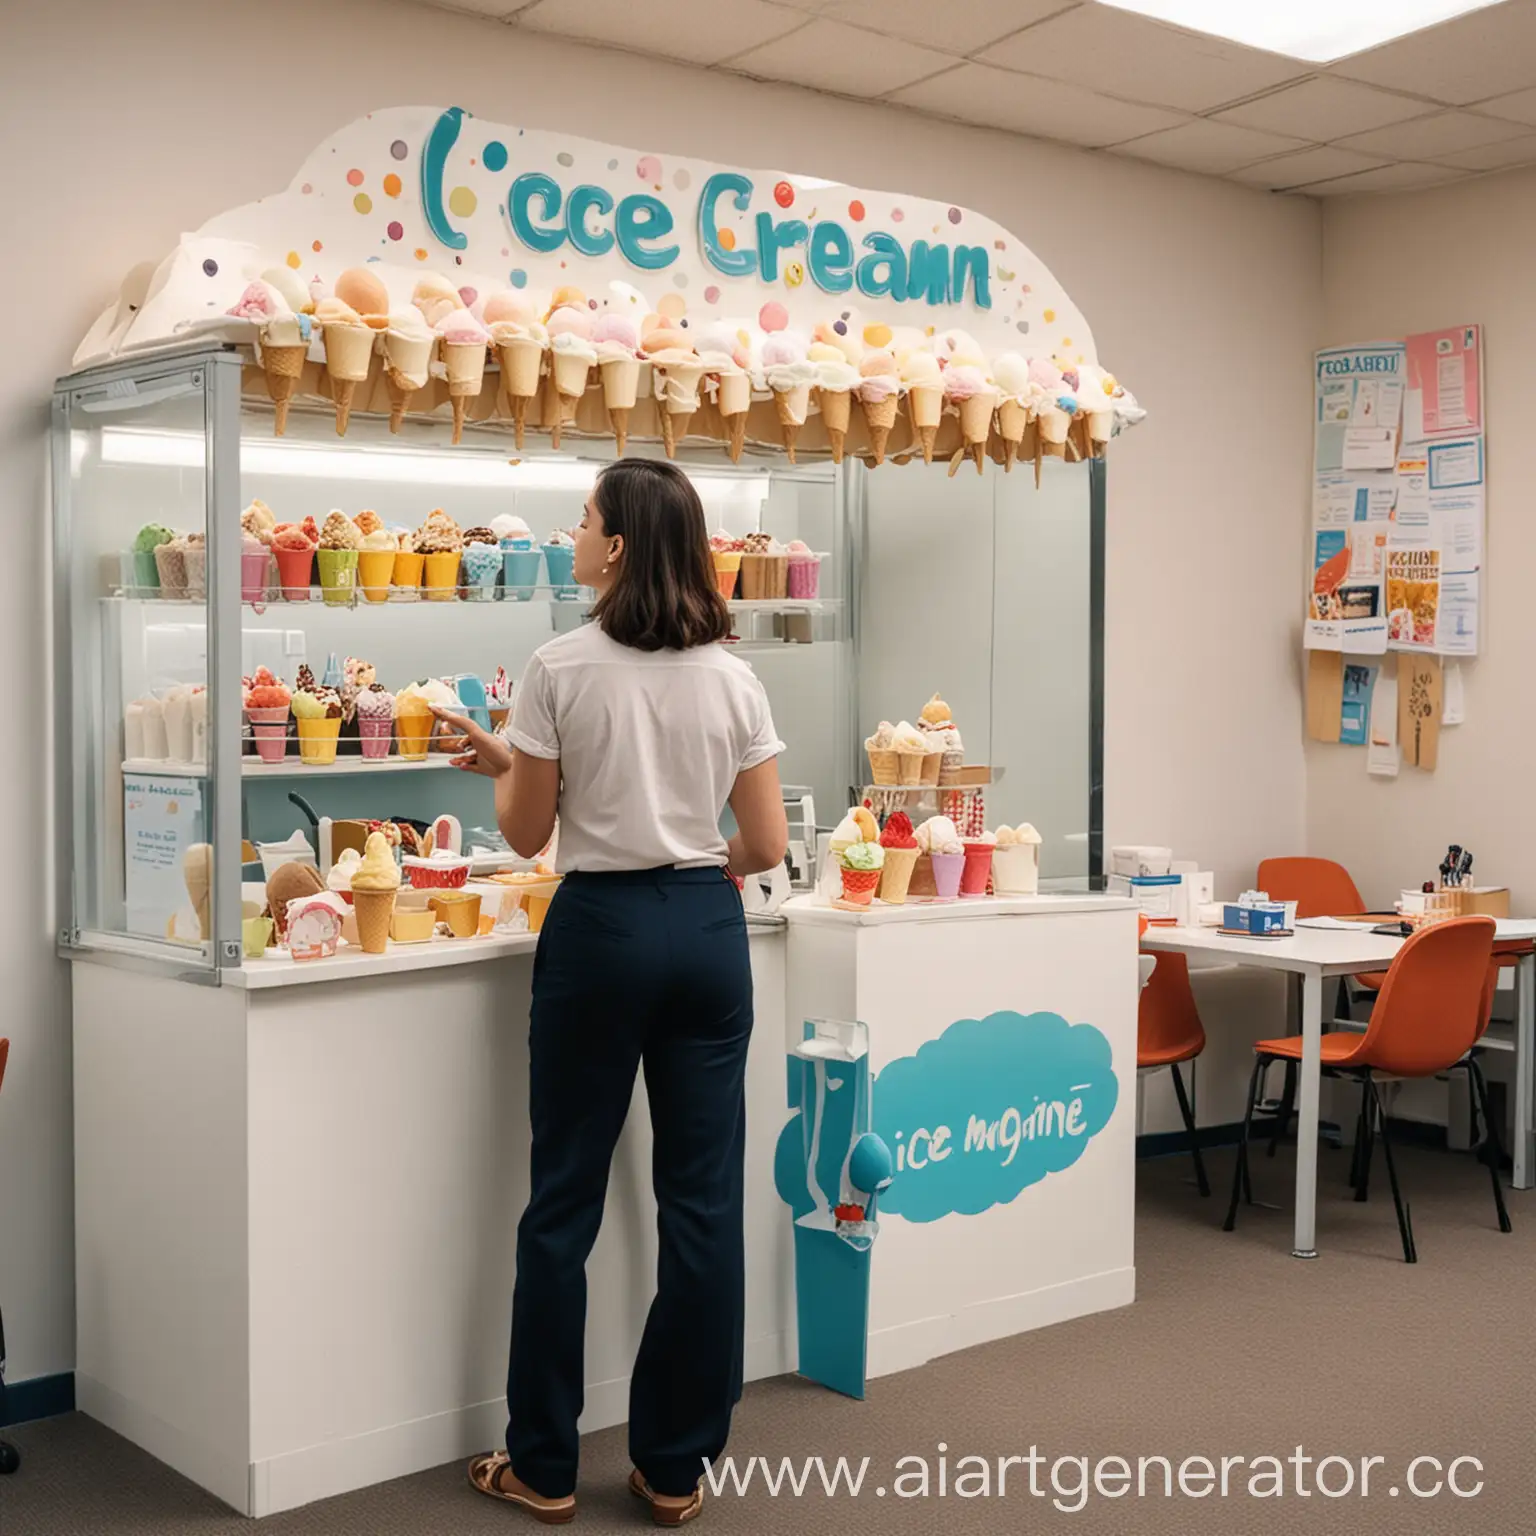 İmagine ice-cream stands in office, people to service employee taking ice-creams.